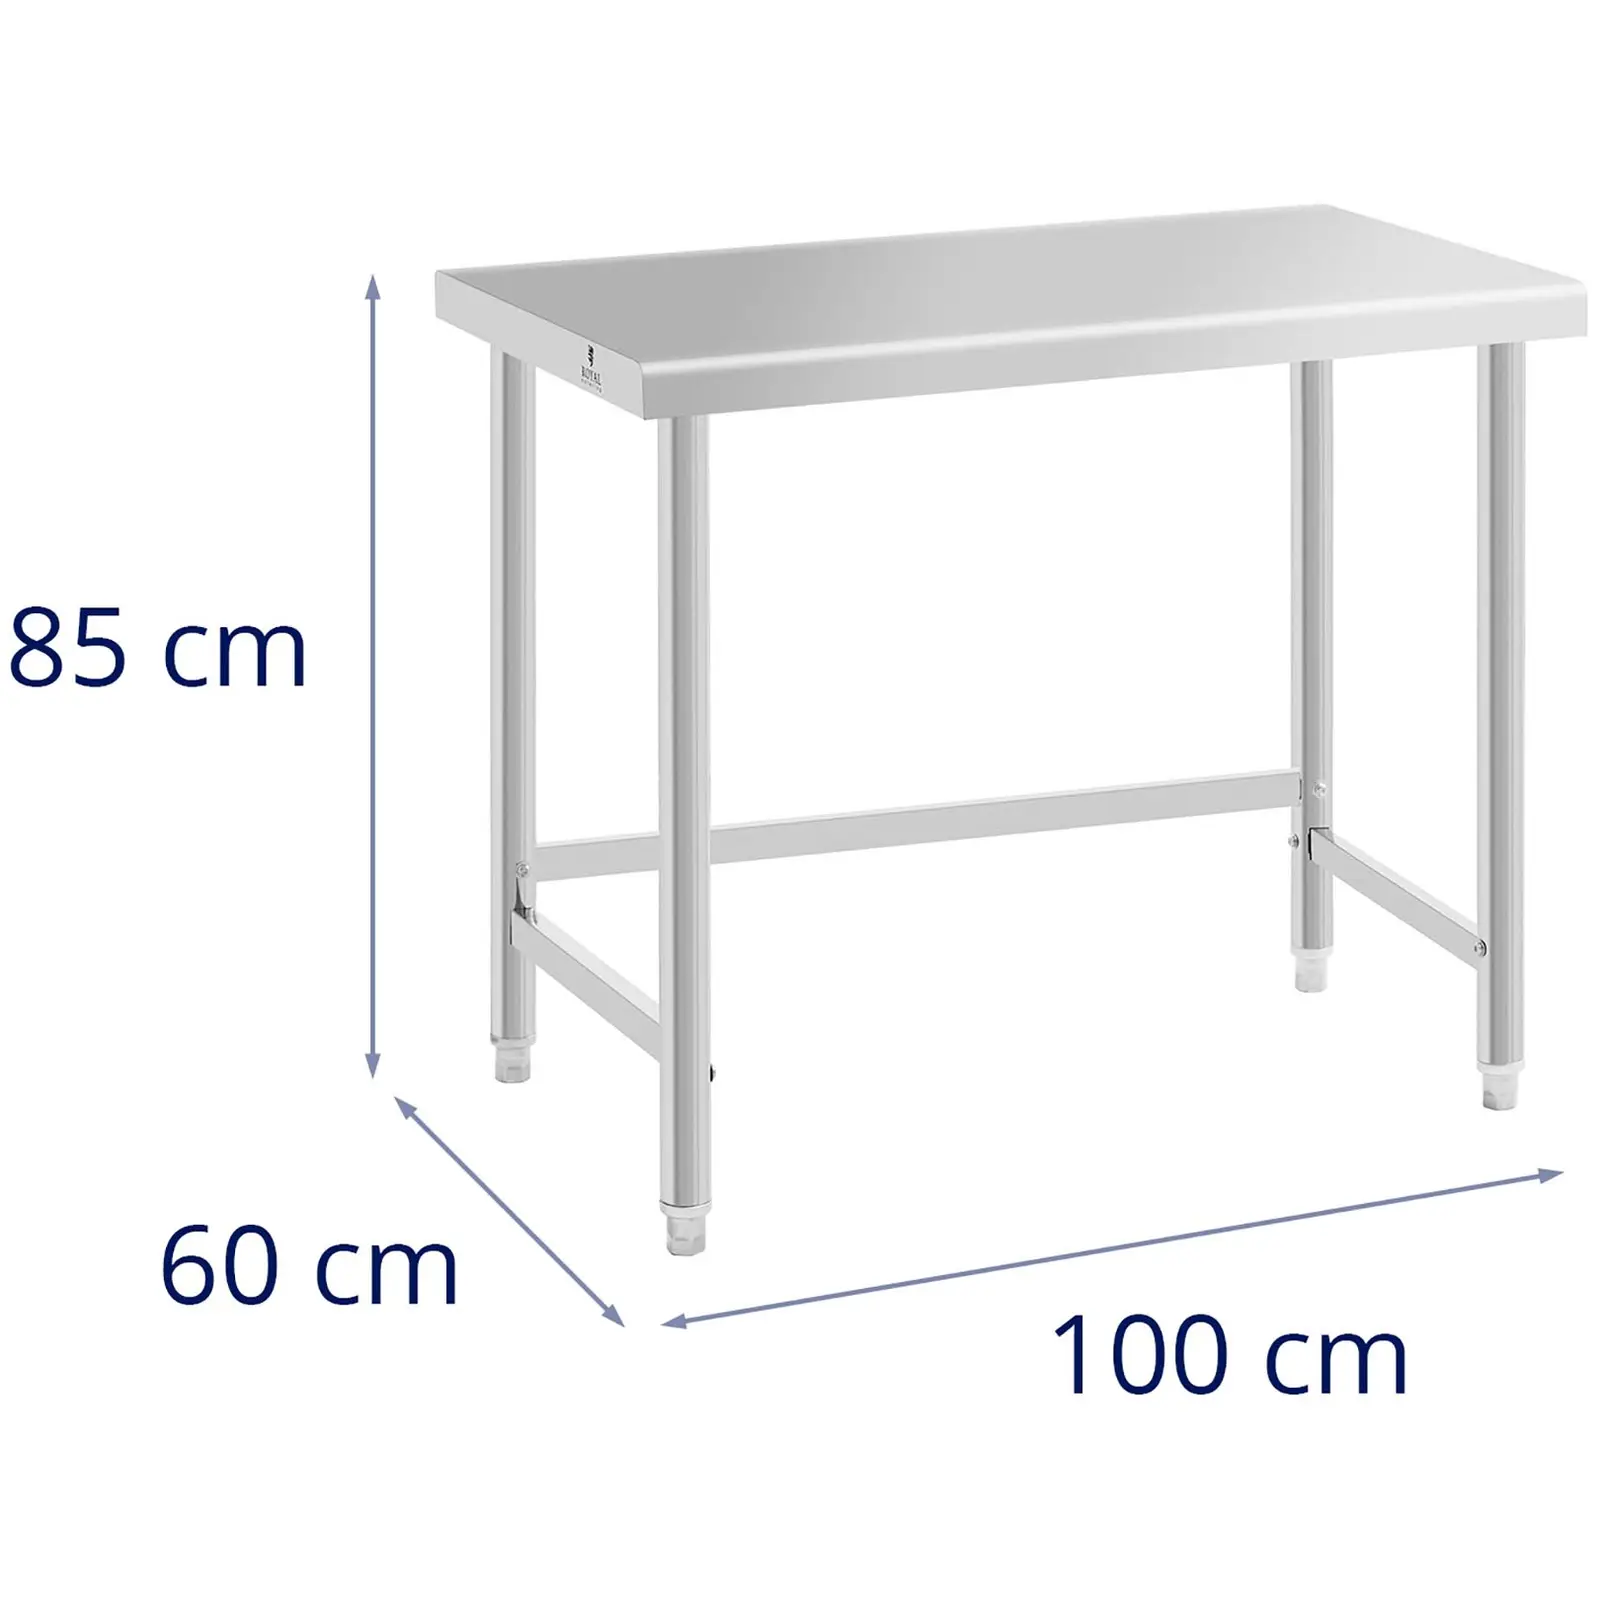 Stainless steel table - 100 x 60 cm - 90 kg load capacity - Royal Catering